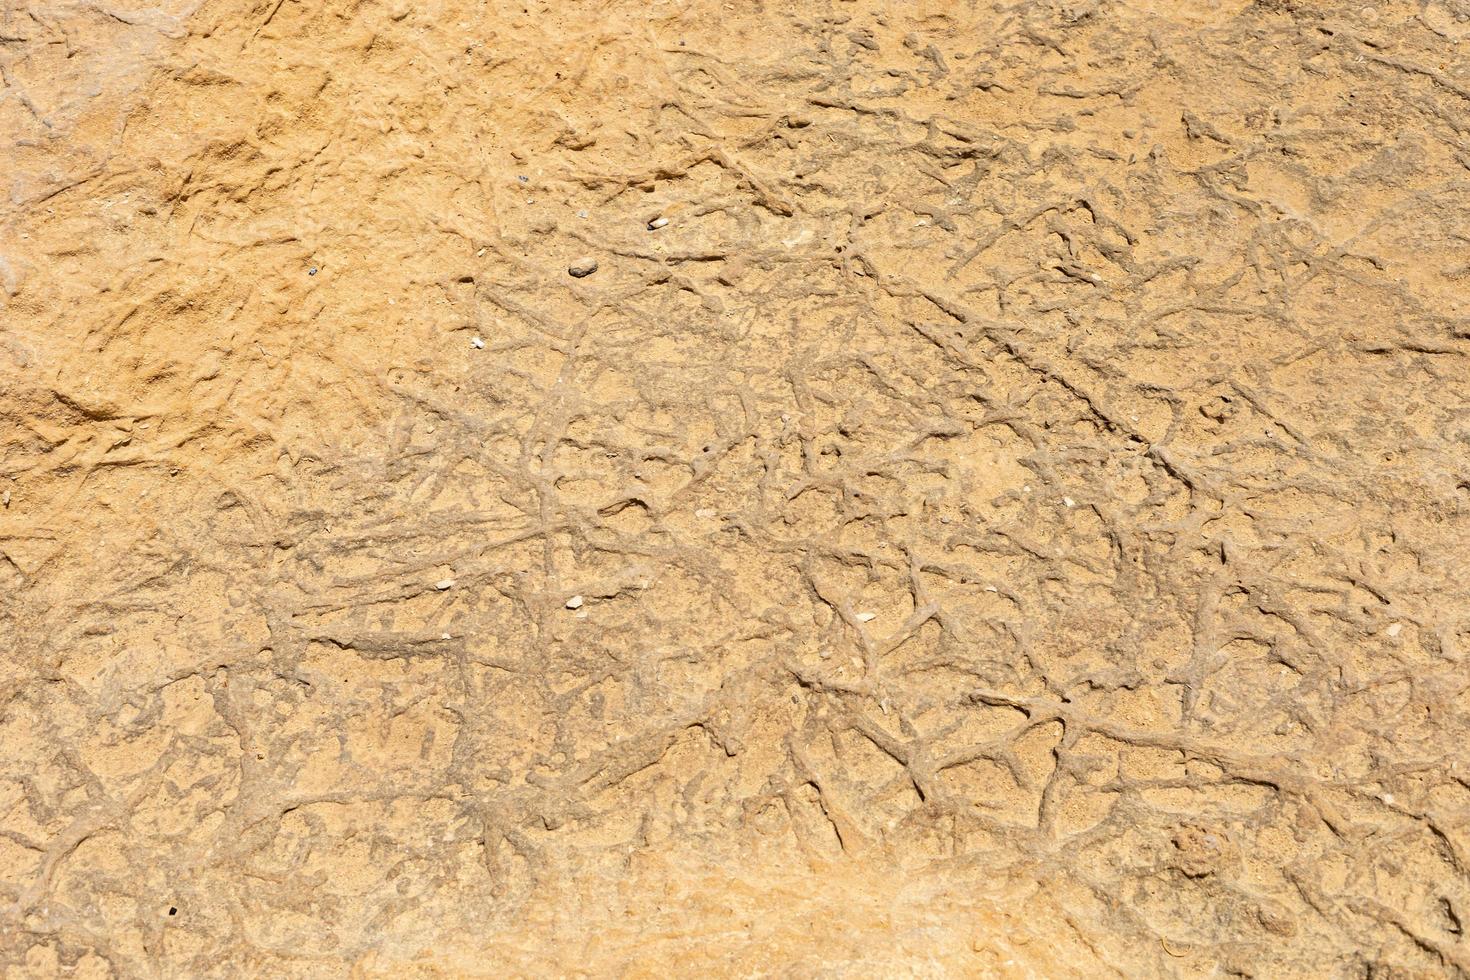 dry groun interesting texture and background. land after drought. desert photo